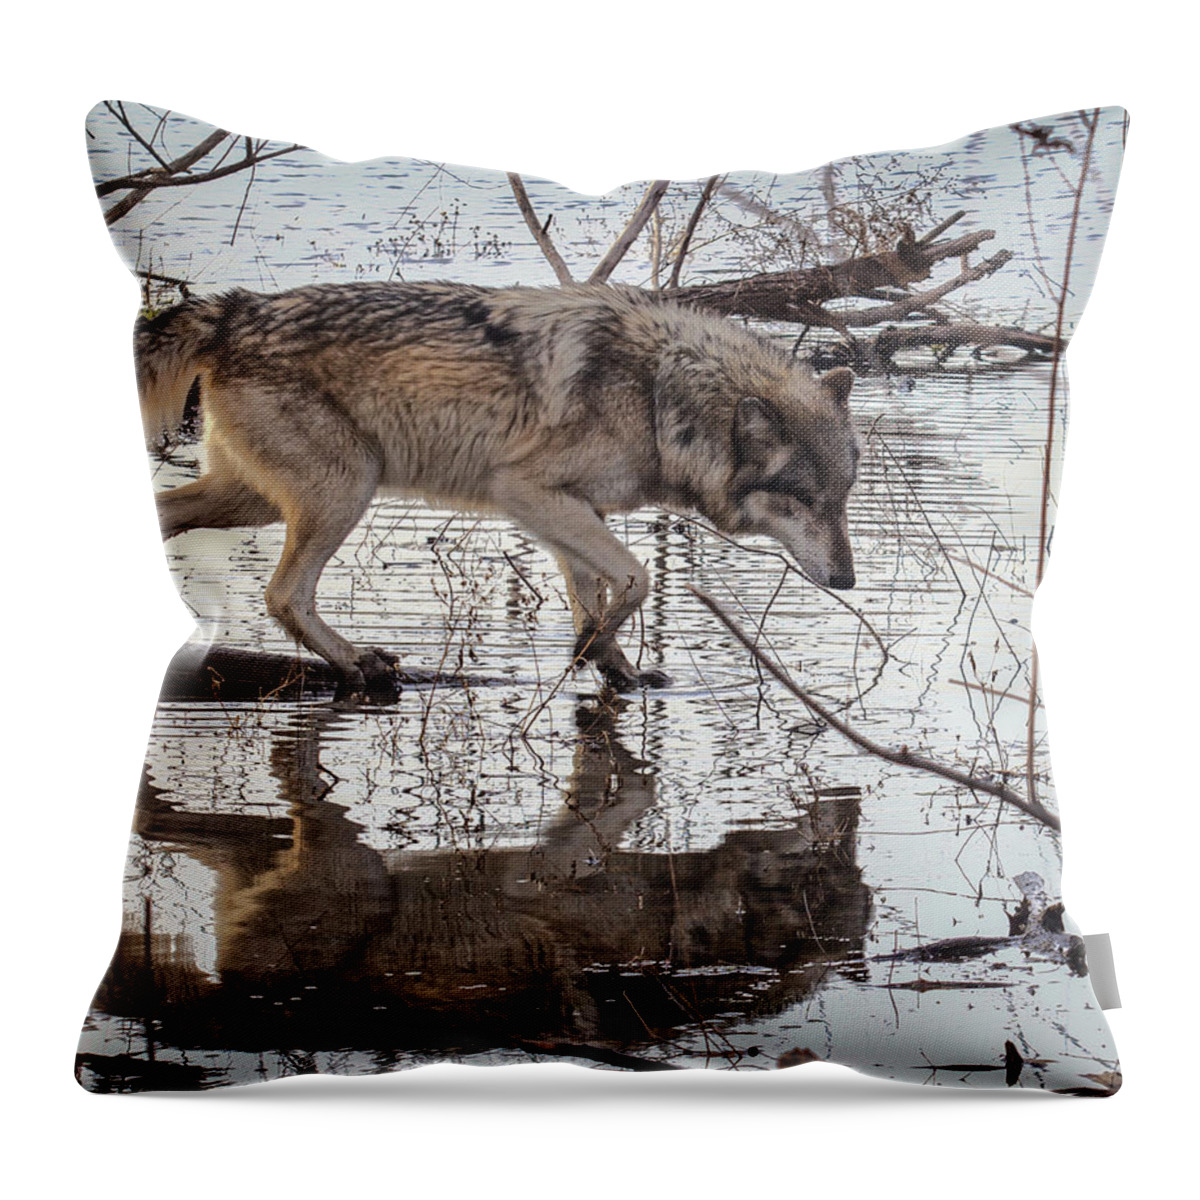 Animal Throw Pillow featuring the photograph The Crossing by Jack R Perry